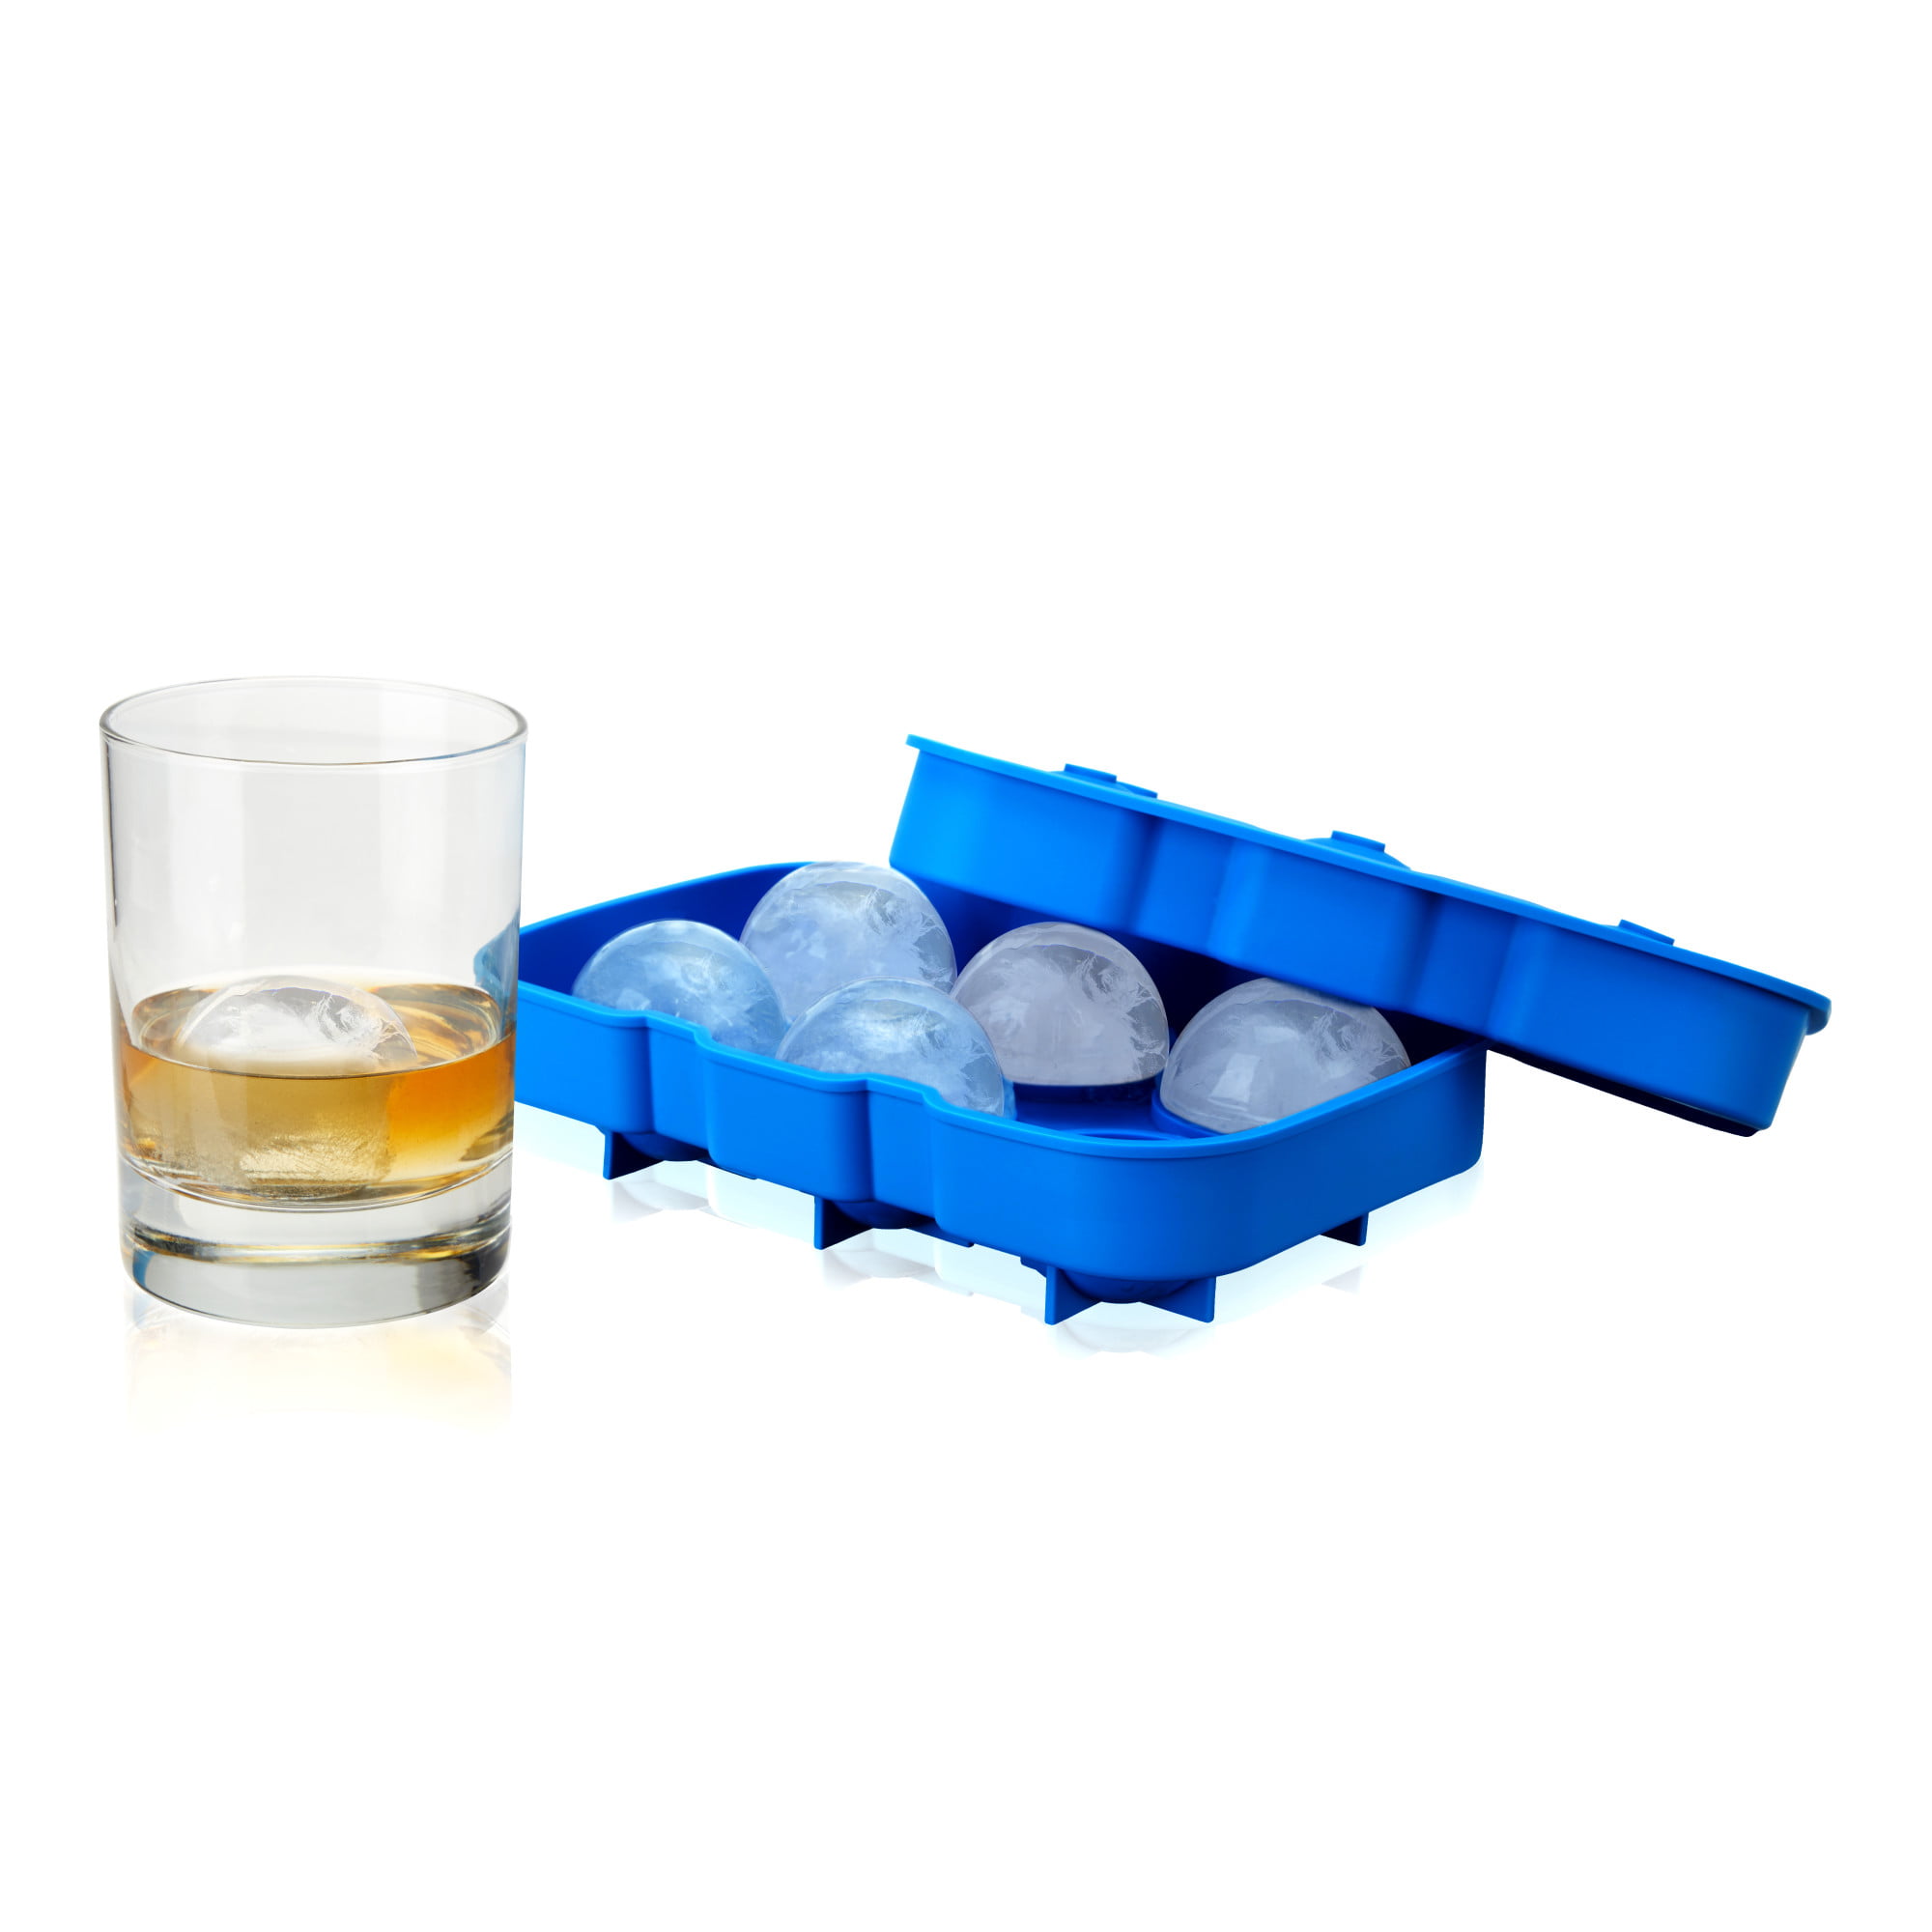  Clear Ice Cube Design Tray - Craft Modern Ice Molds